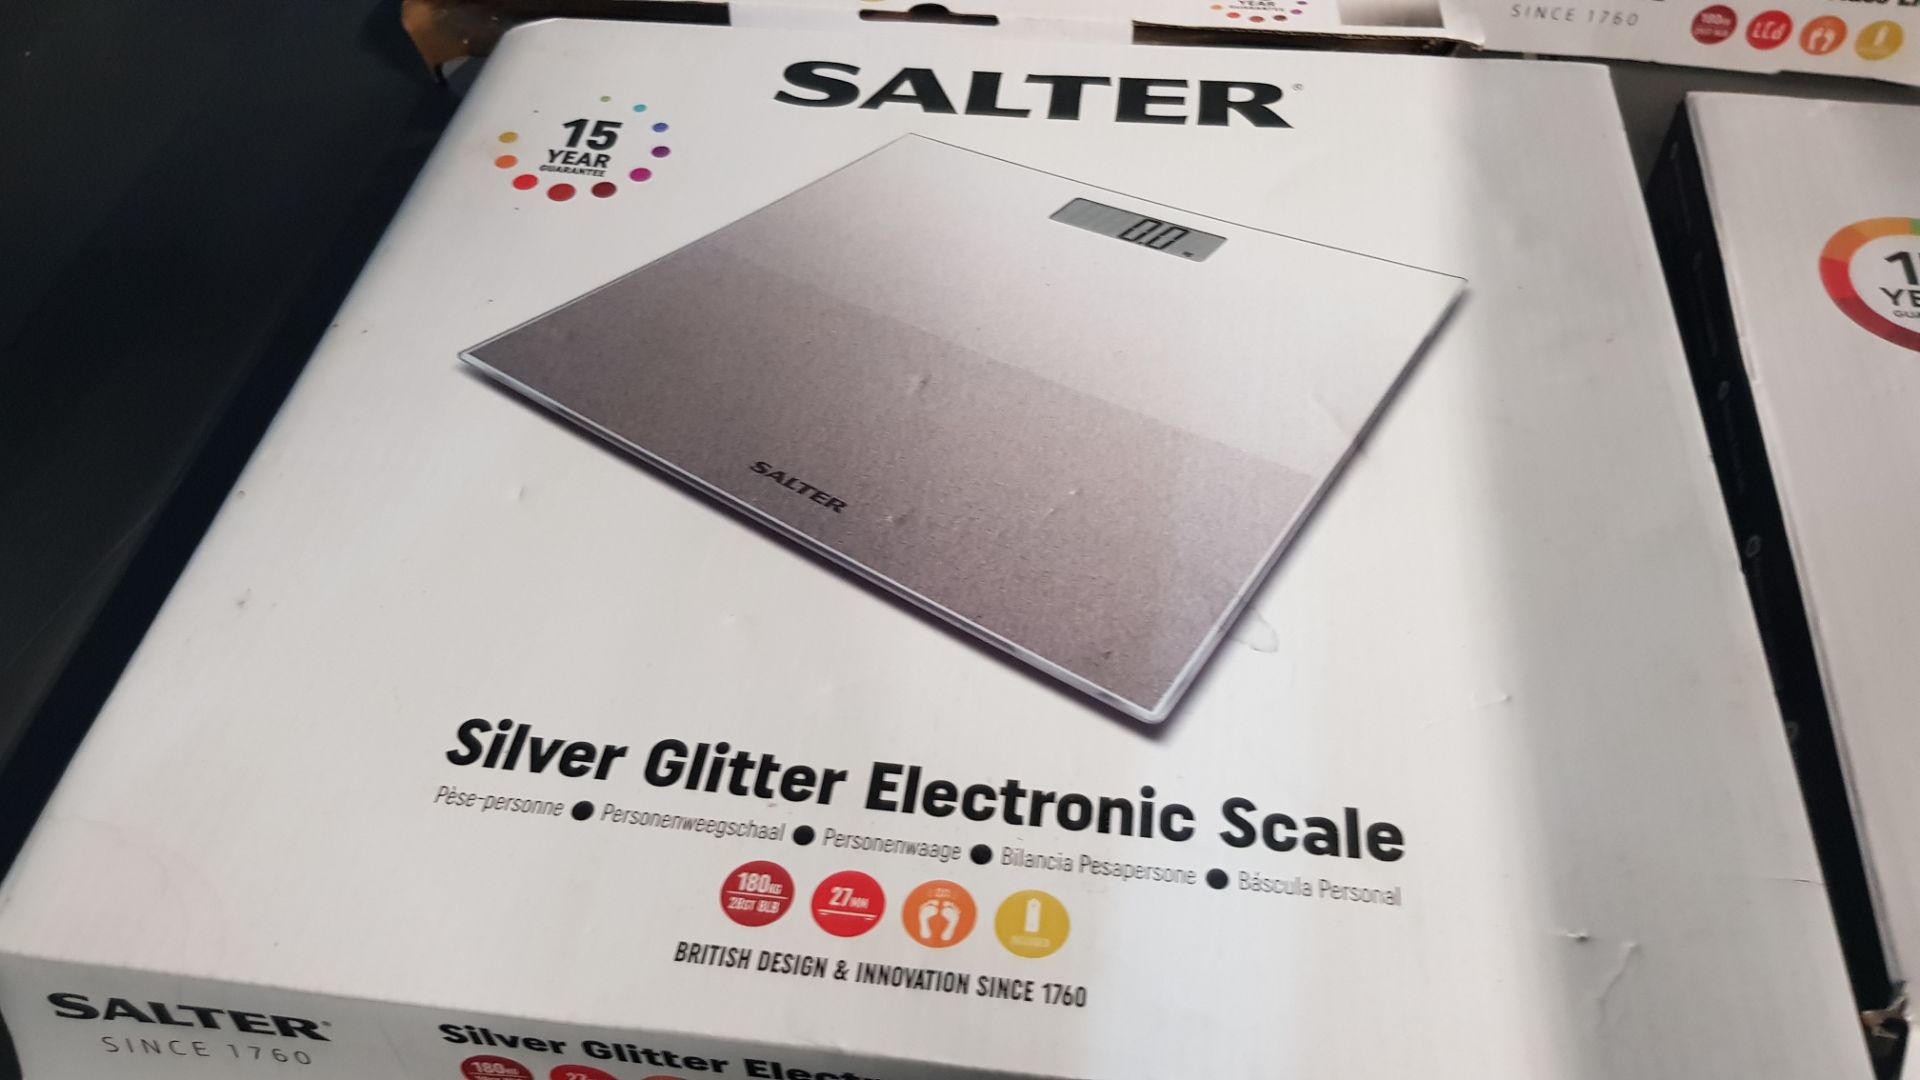 Description: (10/5H) Lot RRP £76 5x Salter Bathroom Scales 2x Silver Glitter Electronic Scale RRP £ - Image 5 of 7